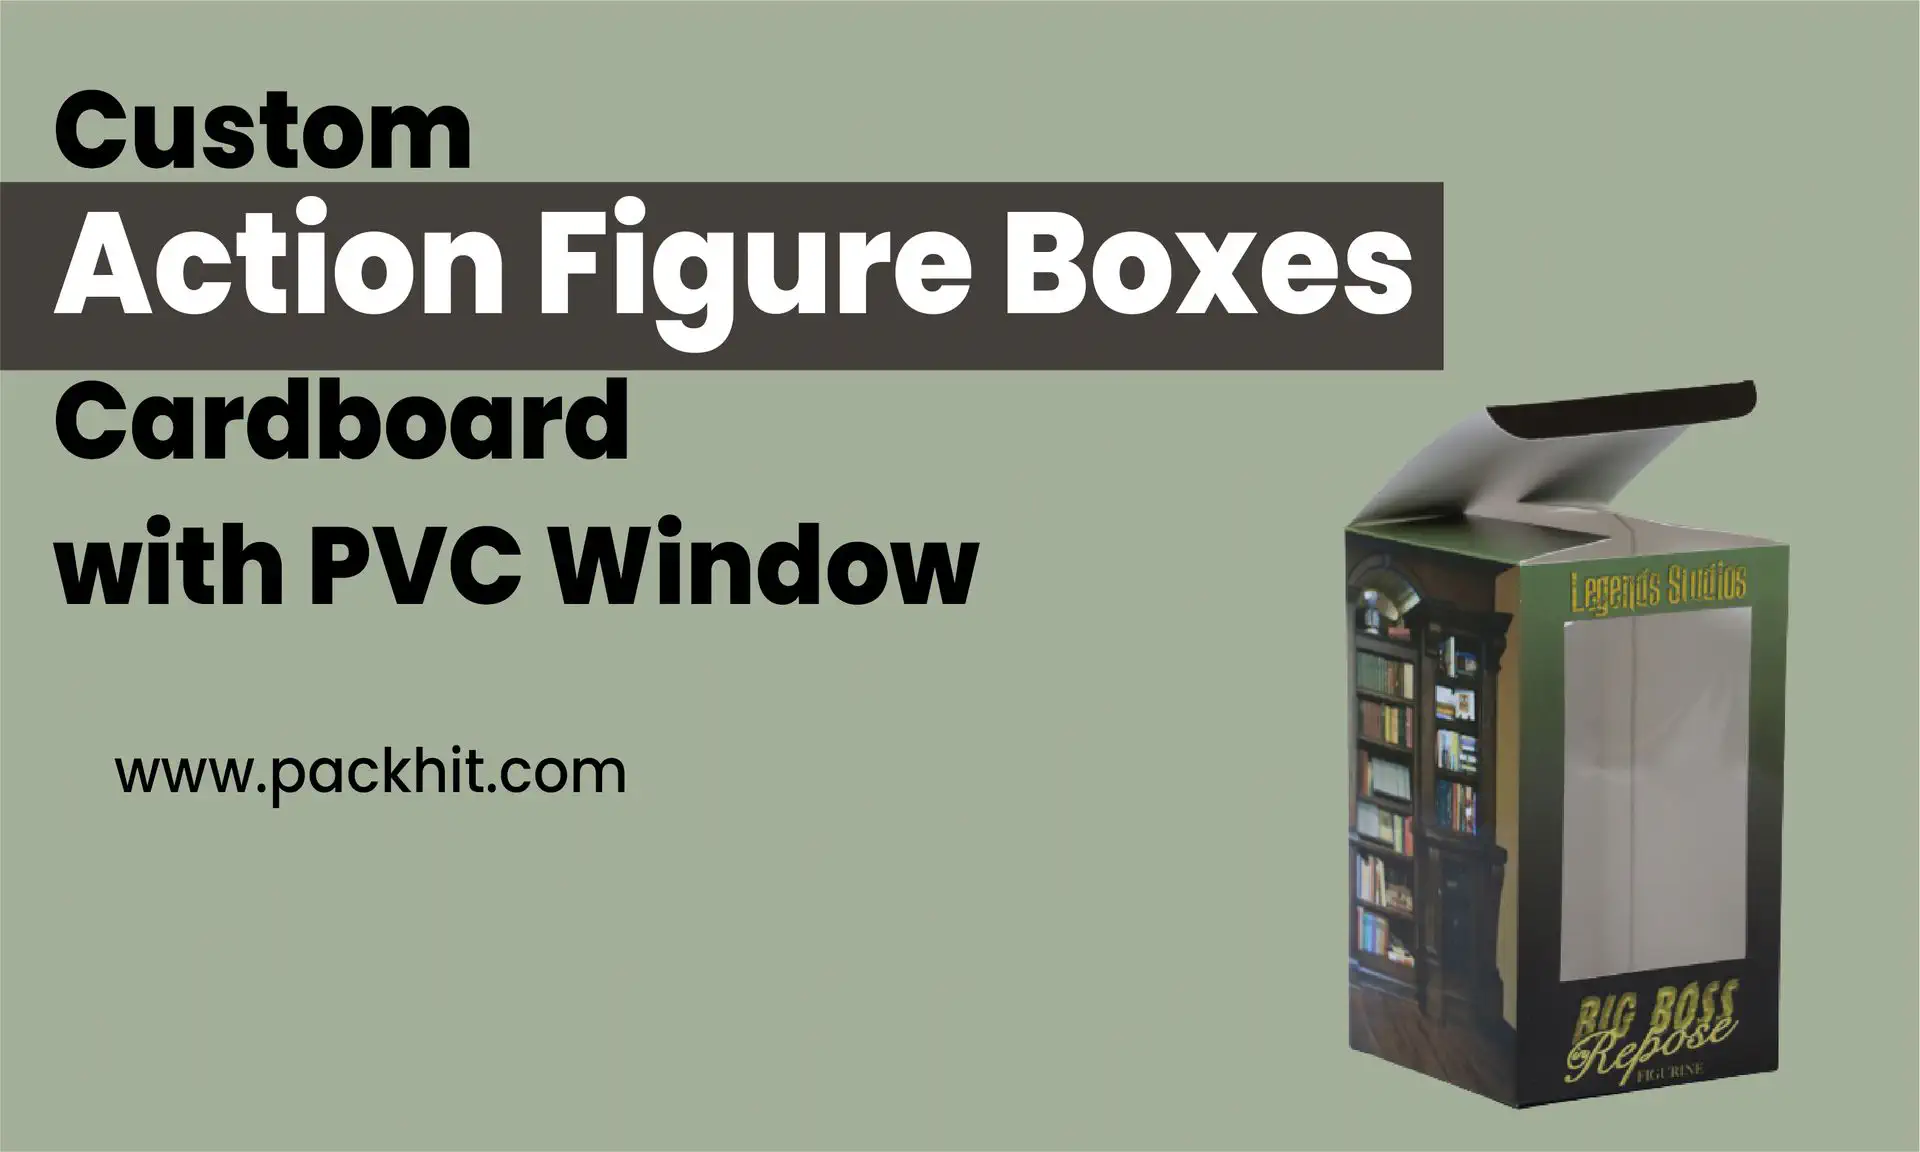 Custom Action figure boxes with window